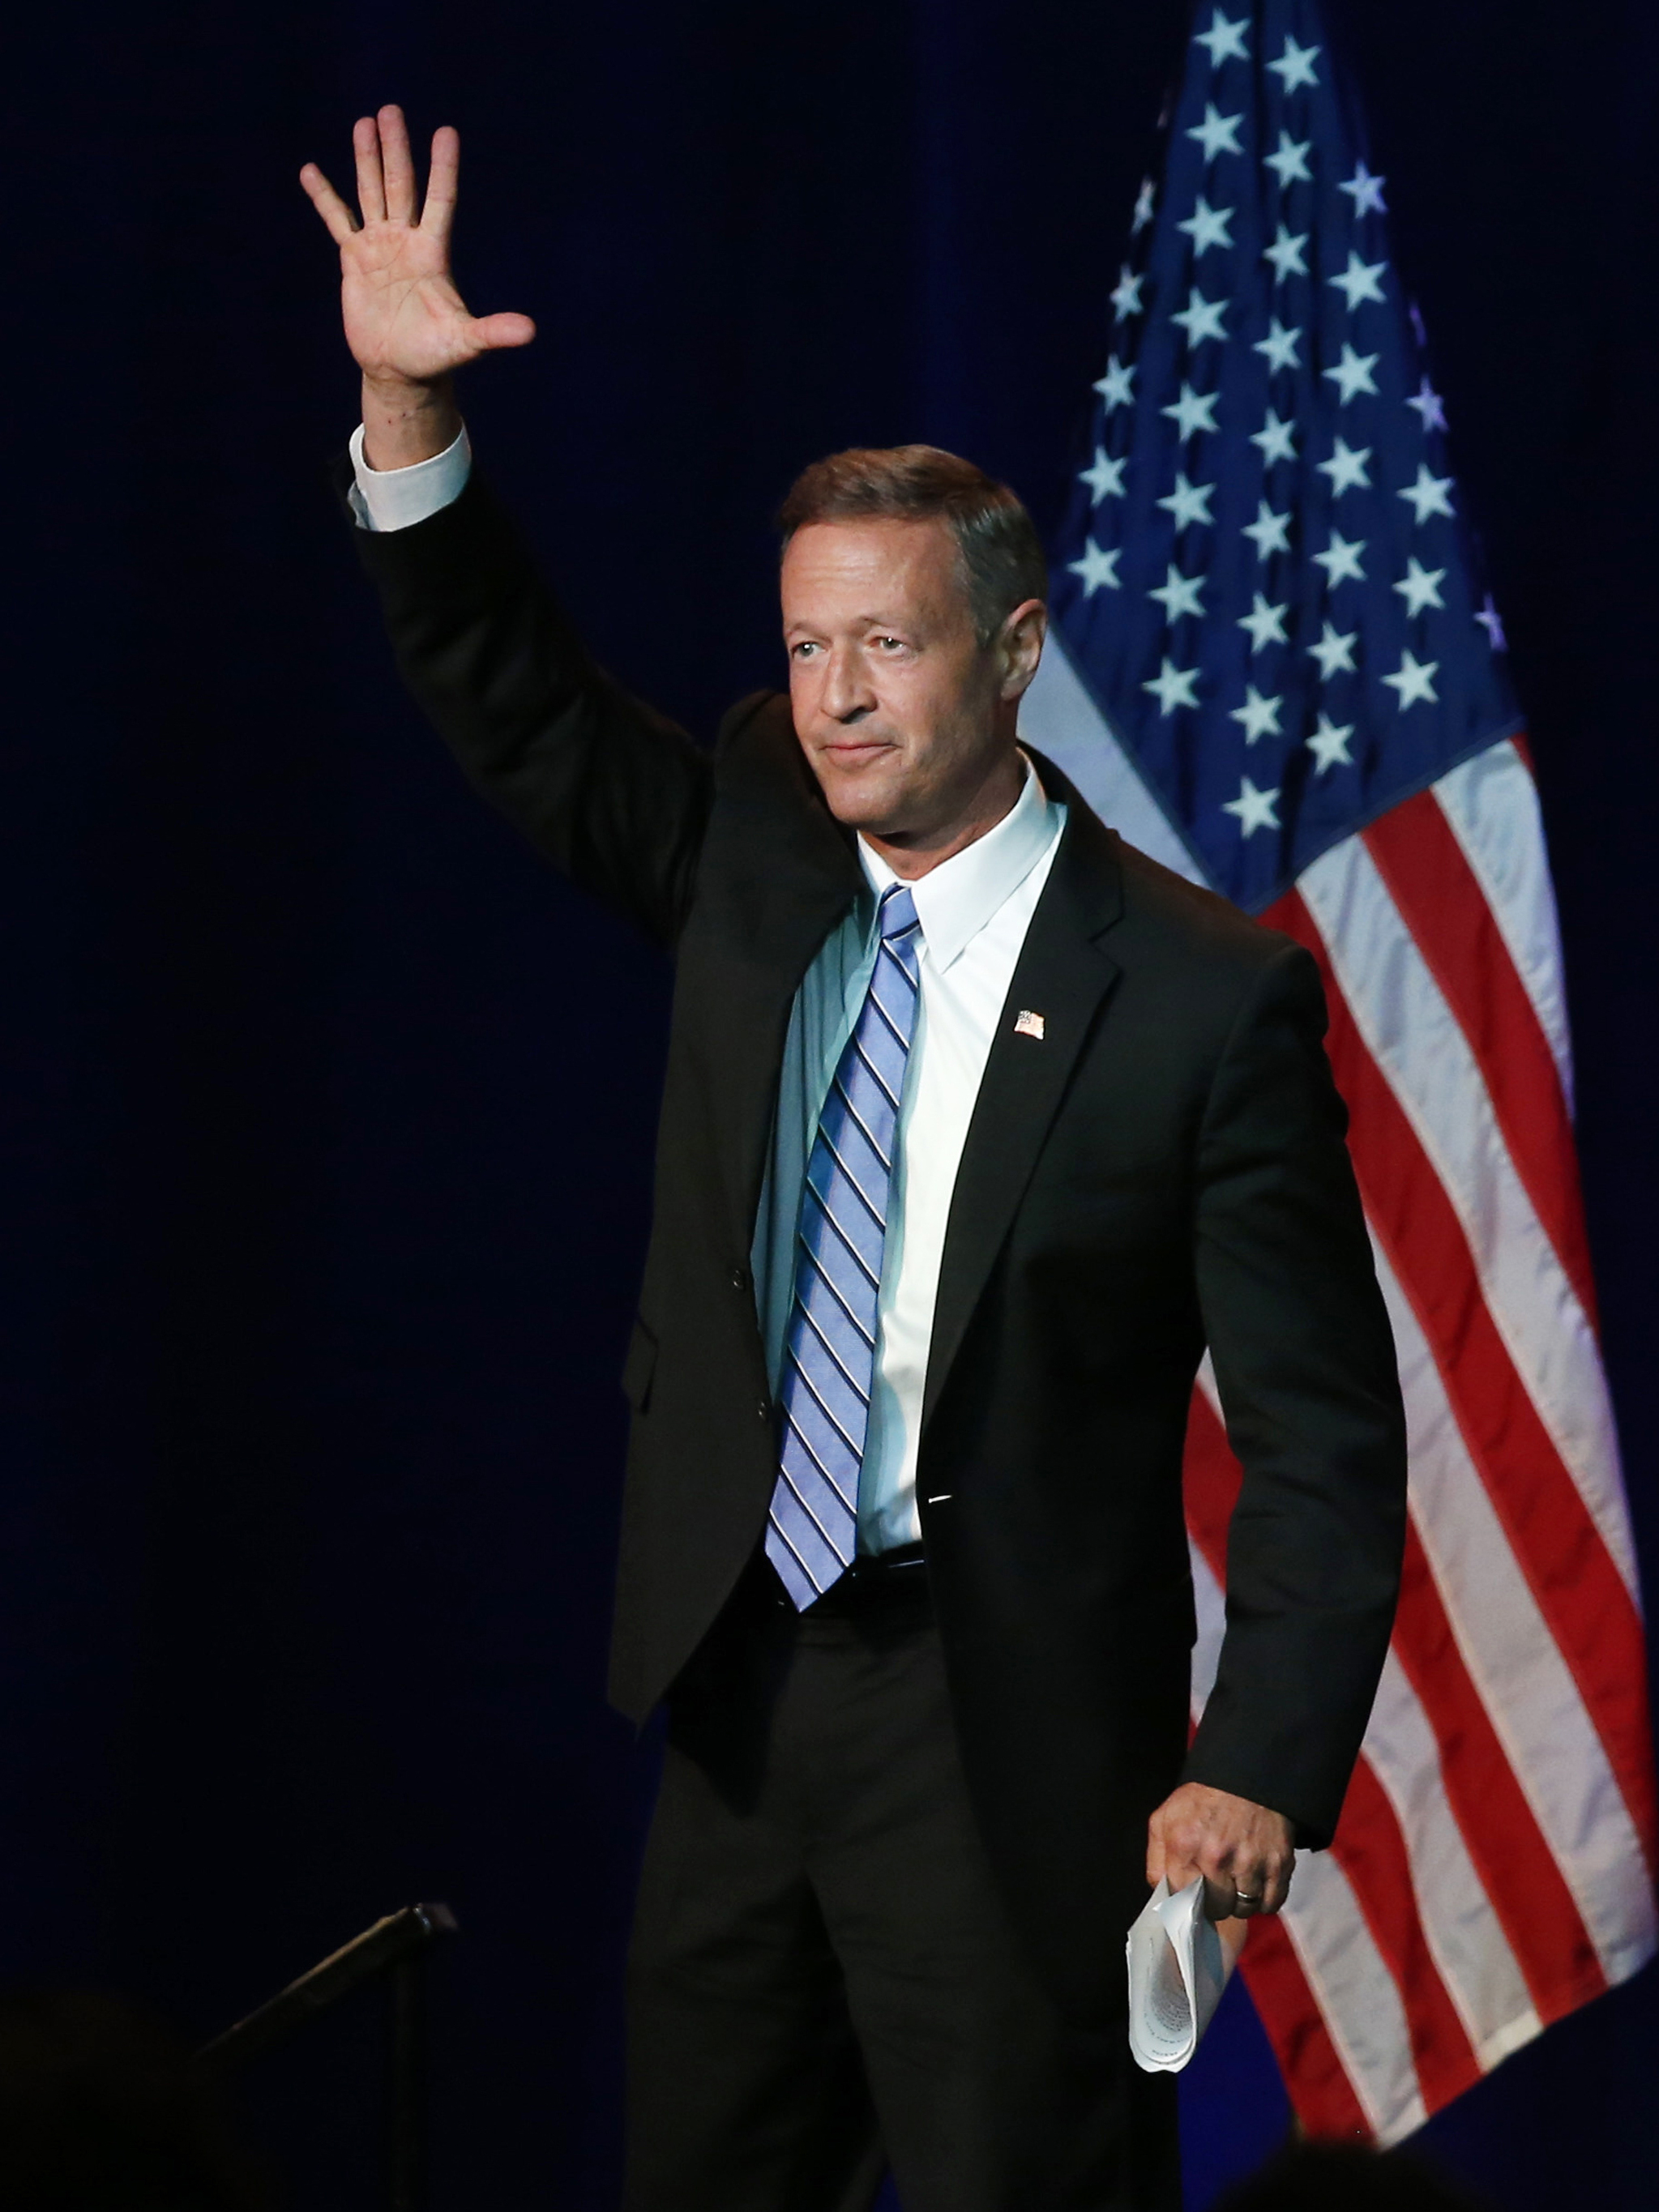 Former Maryland Gov. Martin O'Malley can draw distinctions between himself and his top two rivals on guns. But he'll need a breakout performance to stay in the game. (Photo by Jim Mone/AP)